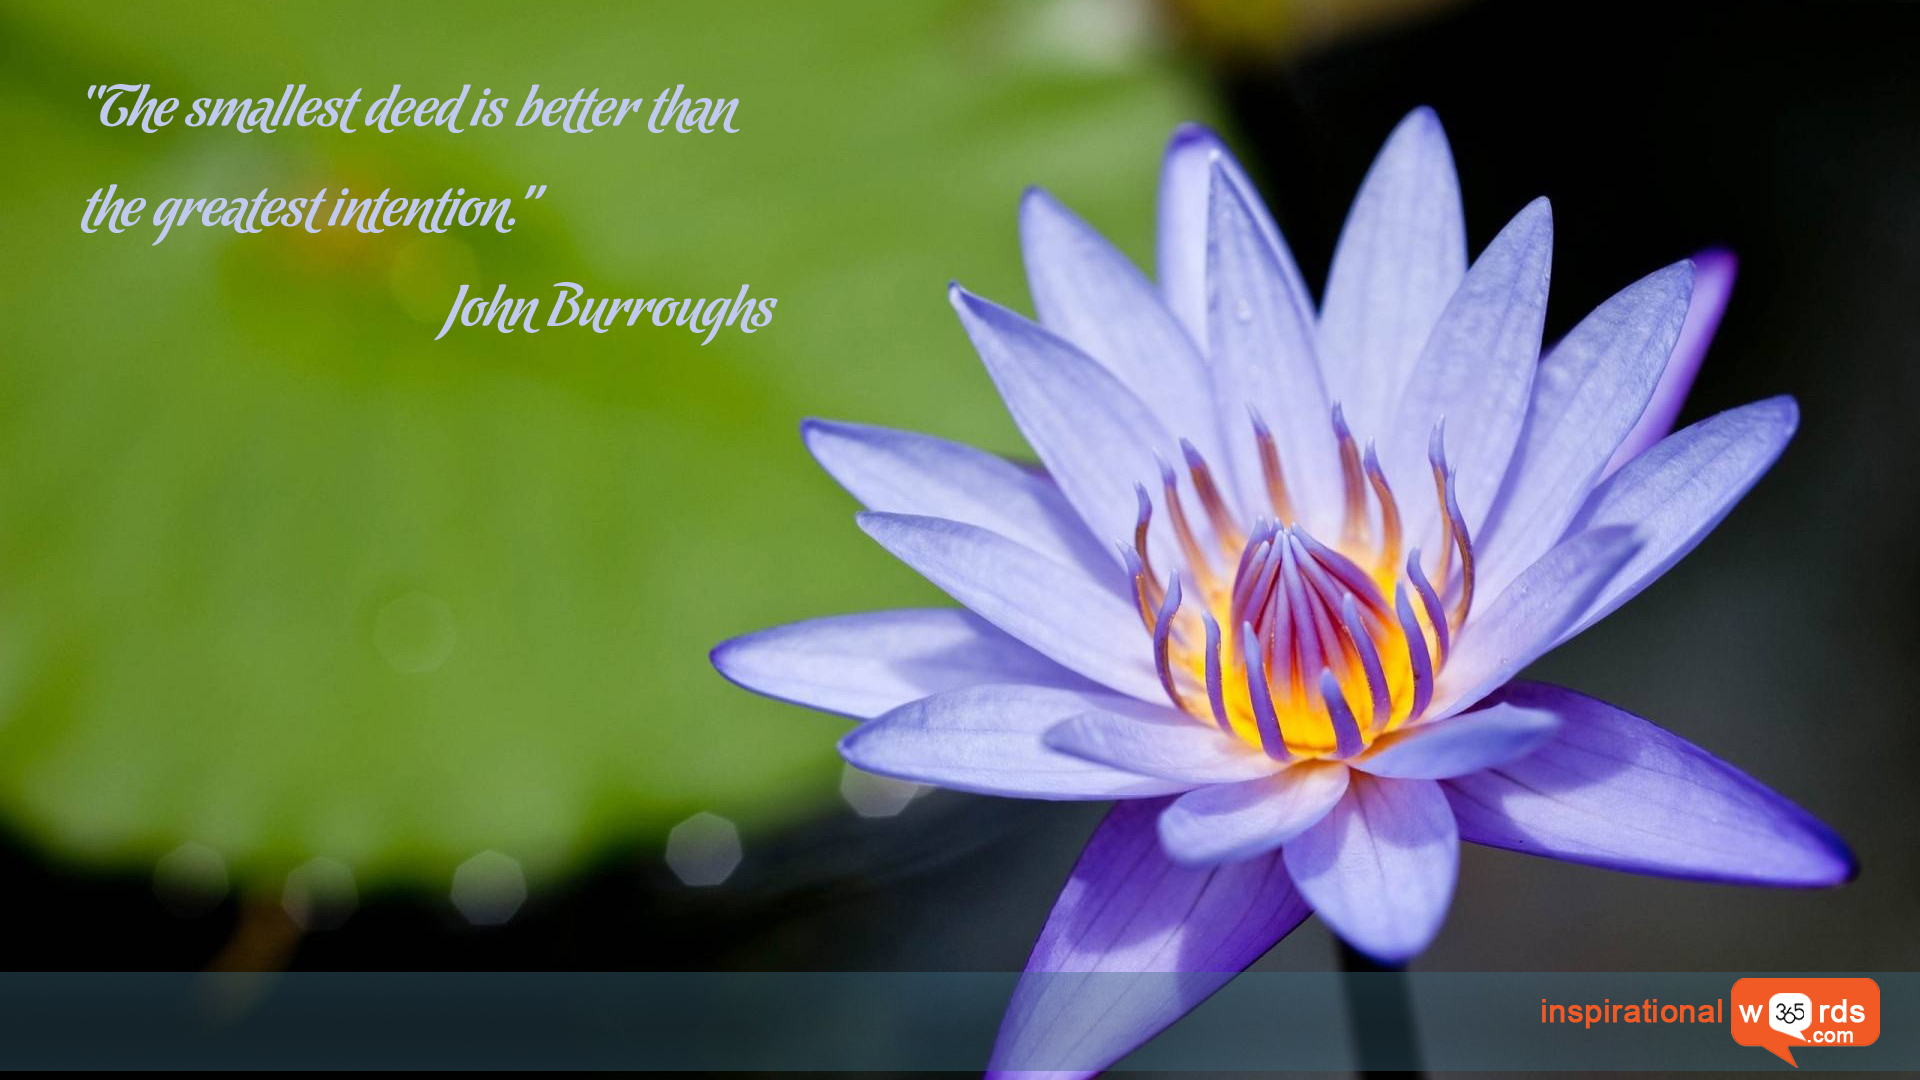 Inspirational Wallpaper Quote by John Burroughs